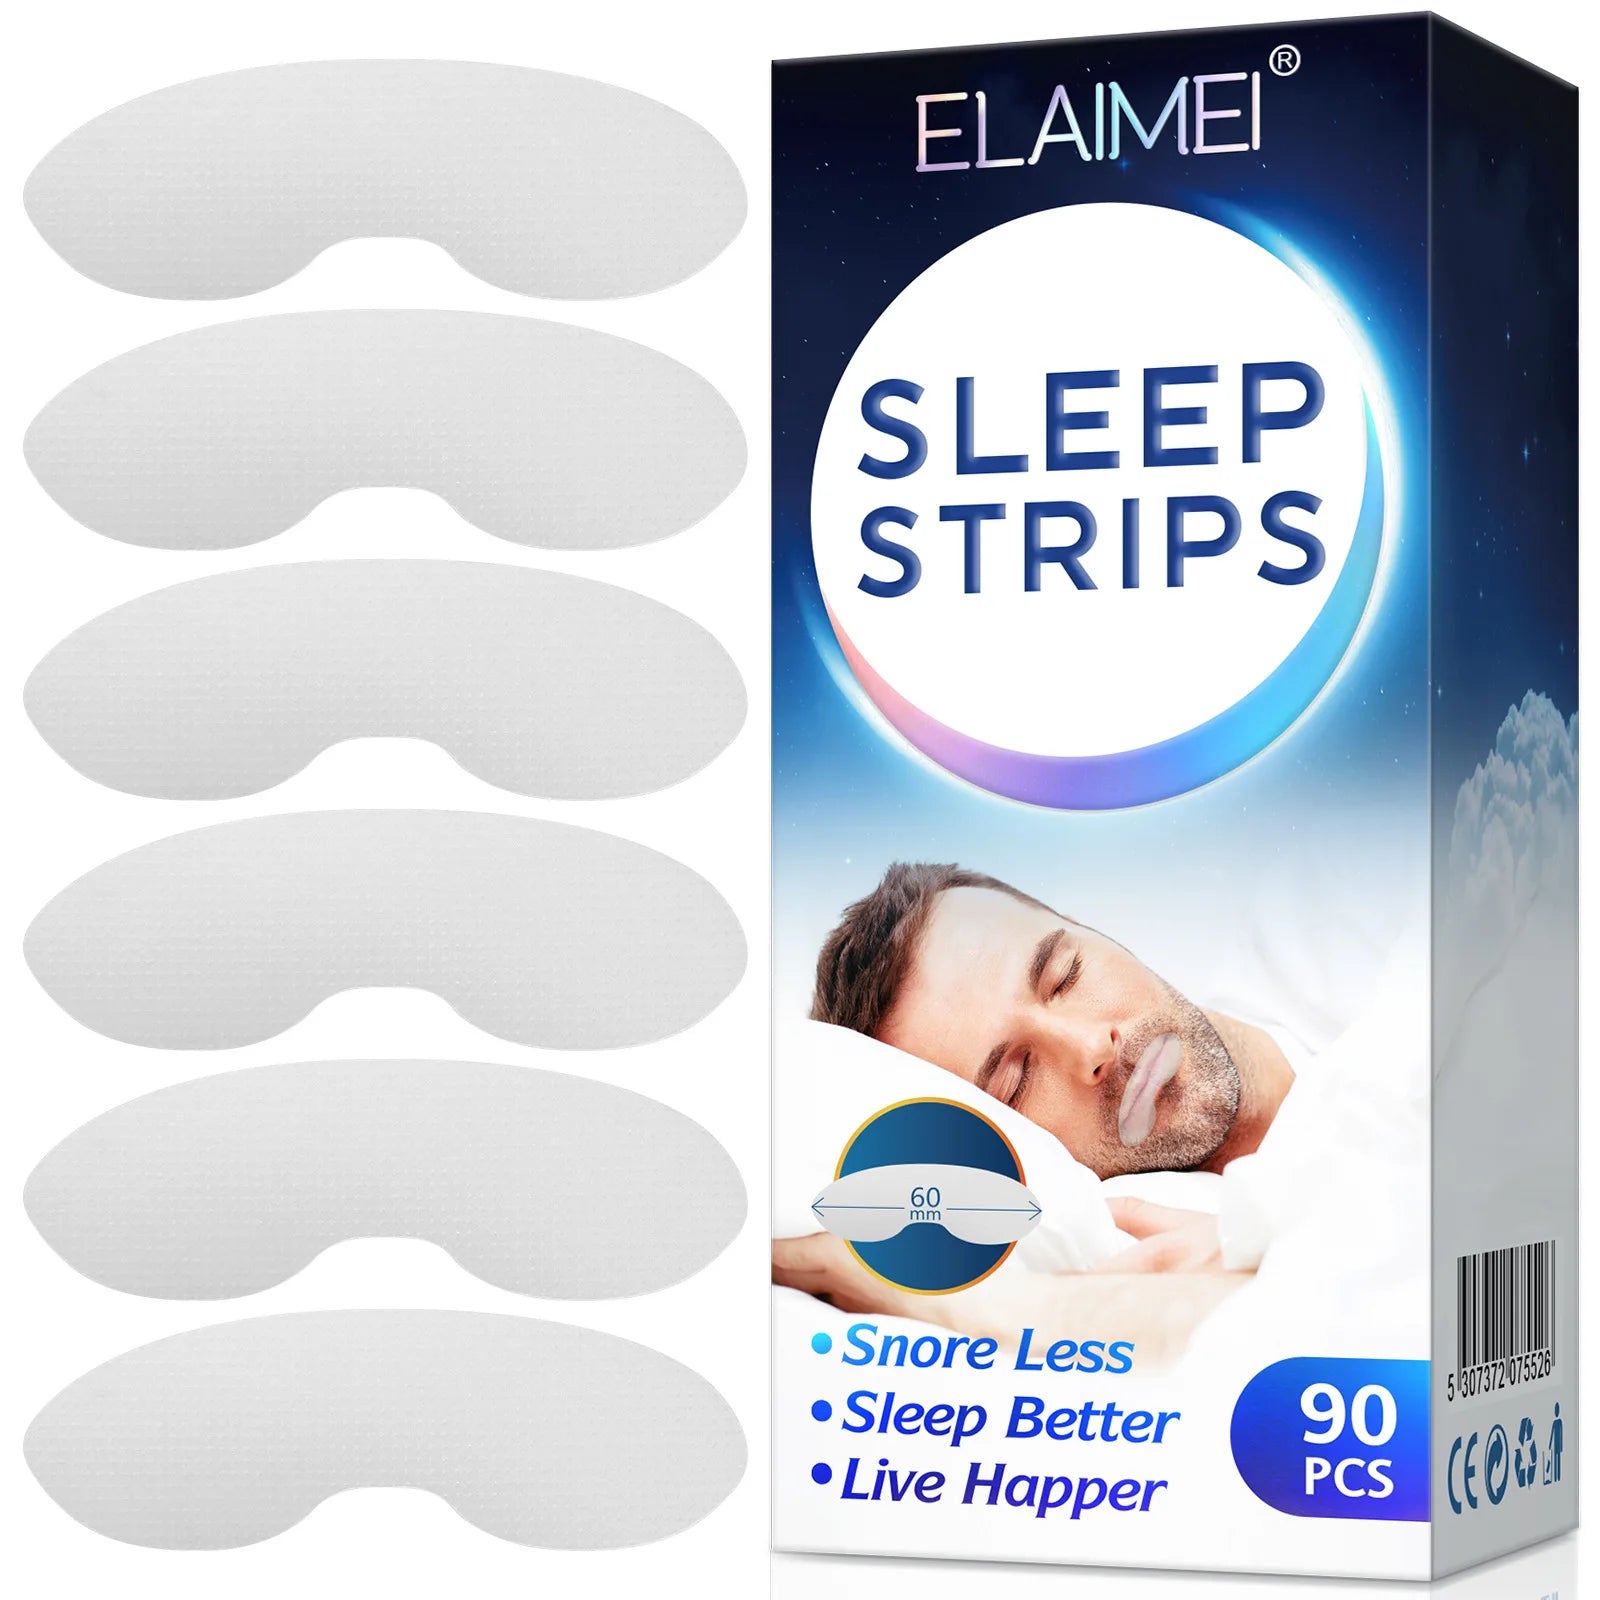 ELAIMEI Anti Snoring Sleep Strips Disposable Gentle Mouth Tape for Better Nose Breathing Reduce Mouth Dryness Sore Throat  beautylum.com 90pcs  